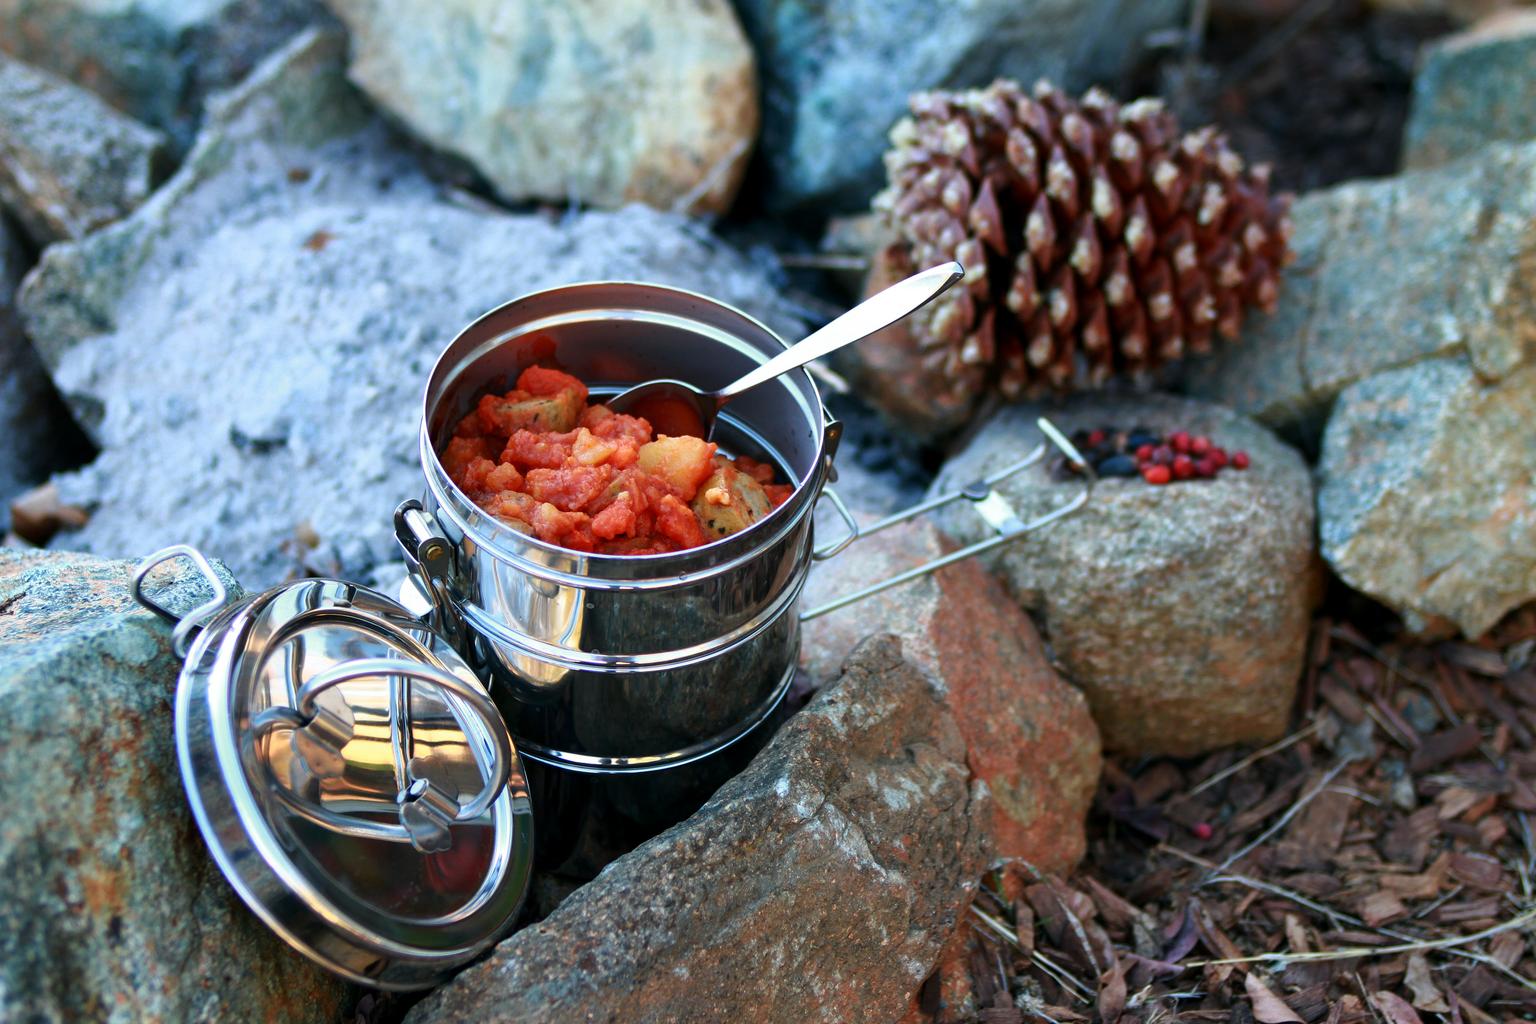 5 Easy Recipes For Winter Camping - Do It Yourself RV